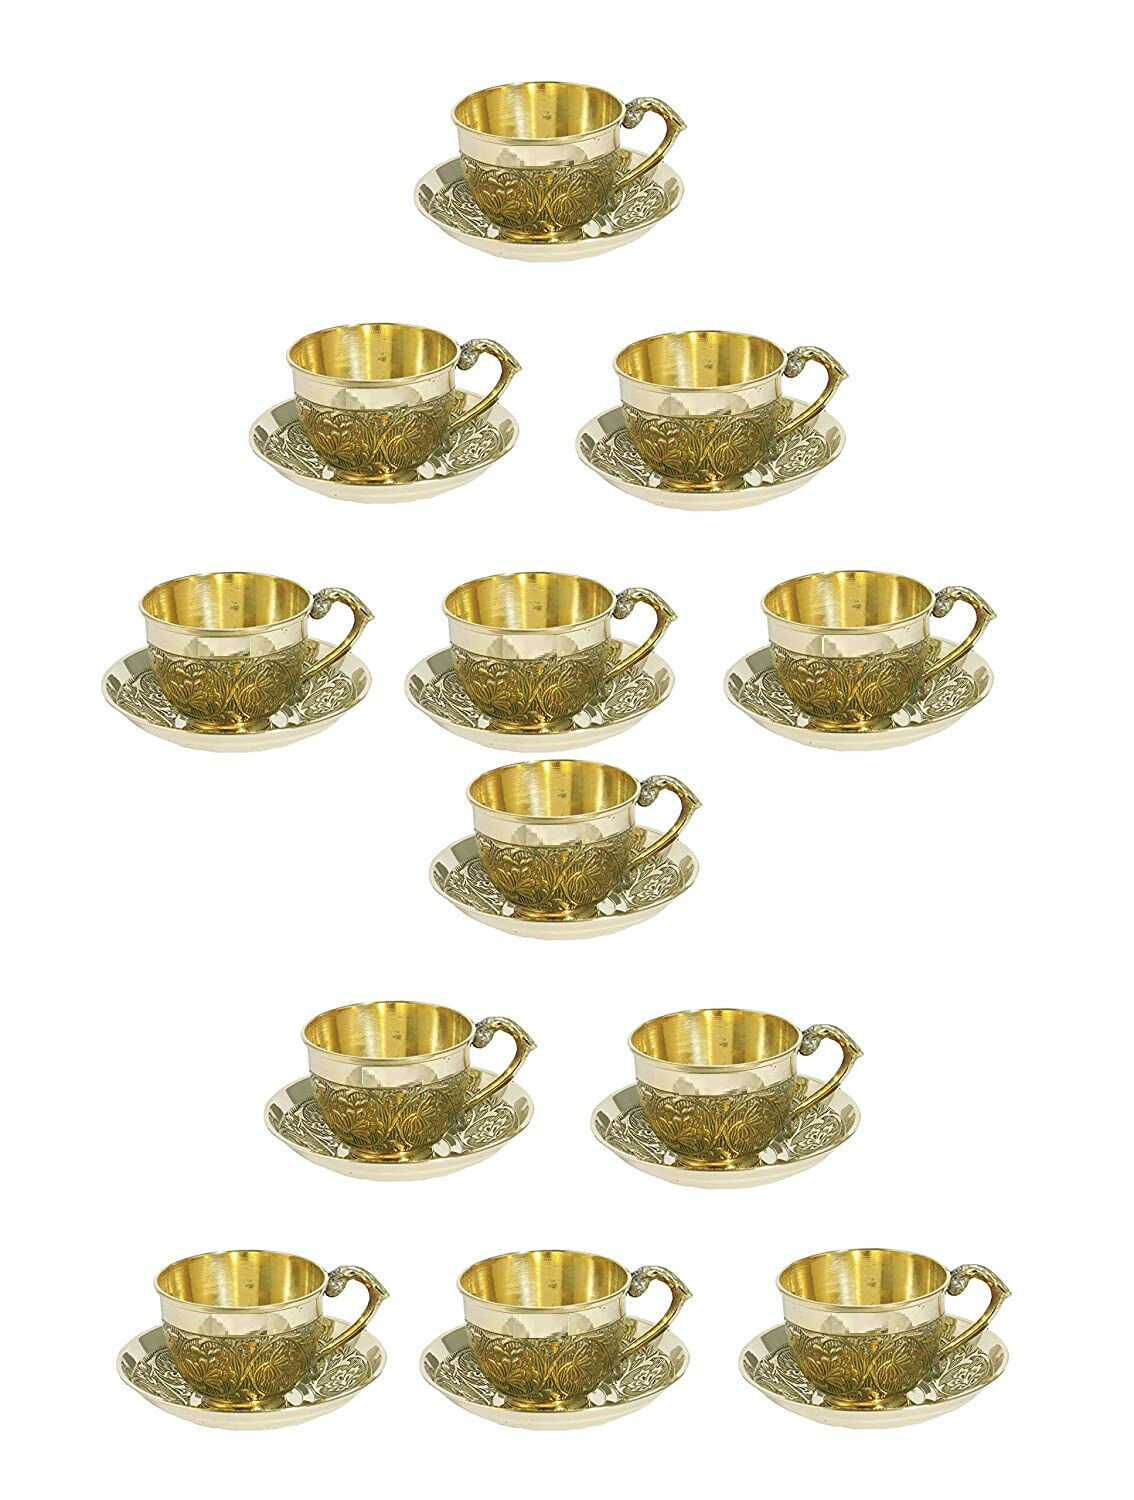 Traditional Handmade Brass Cup & Saucer For Tea & Coffee 150ml Each Set Of 12